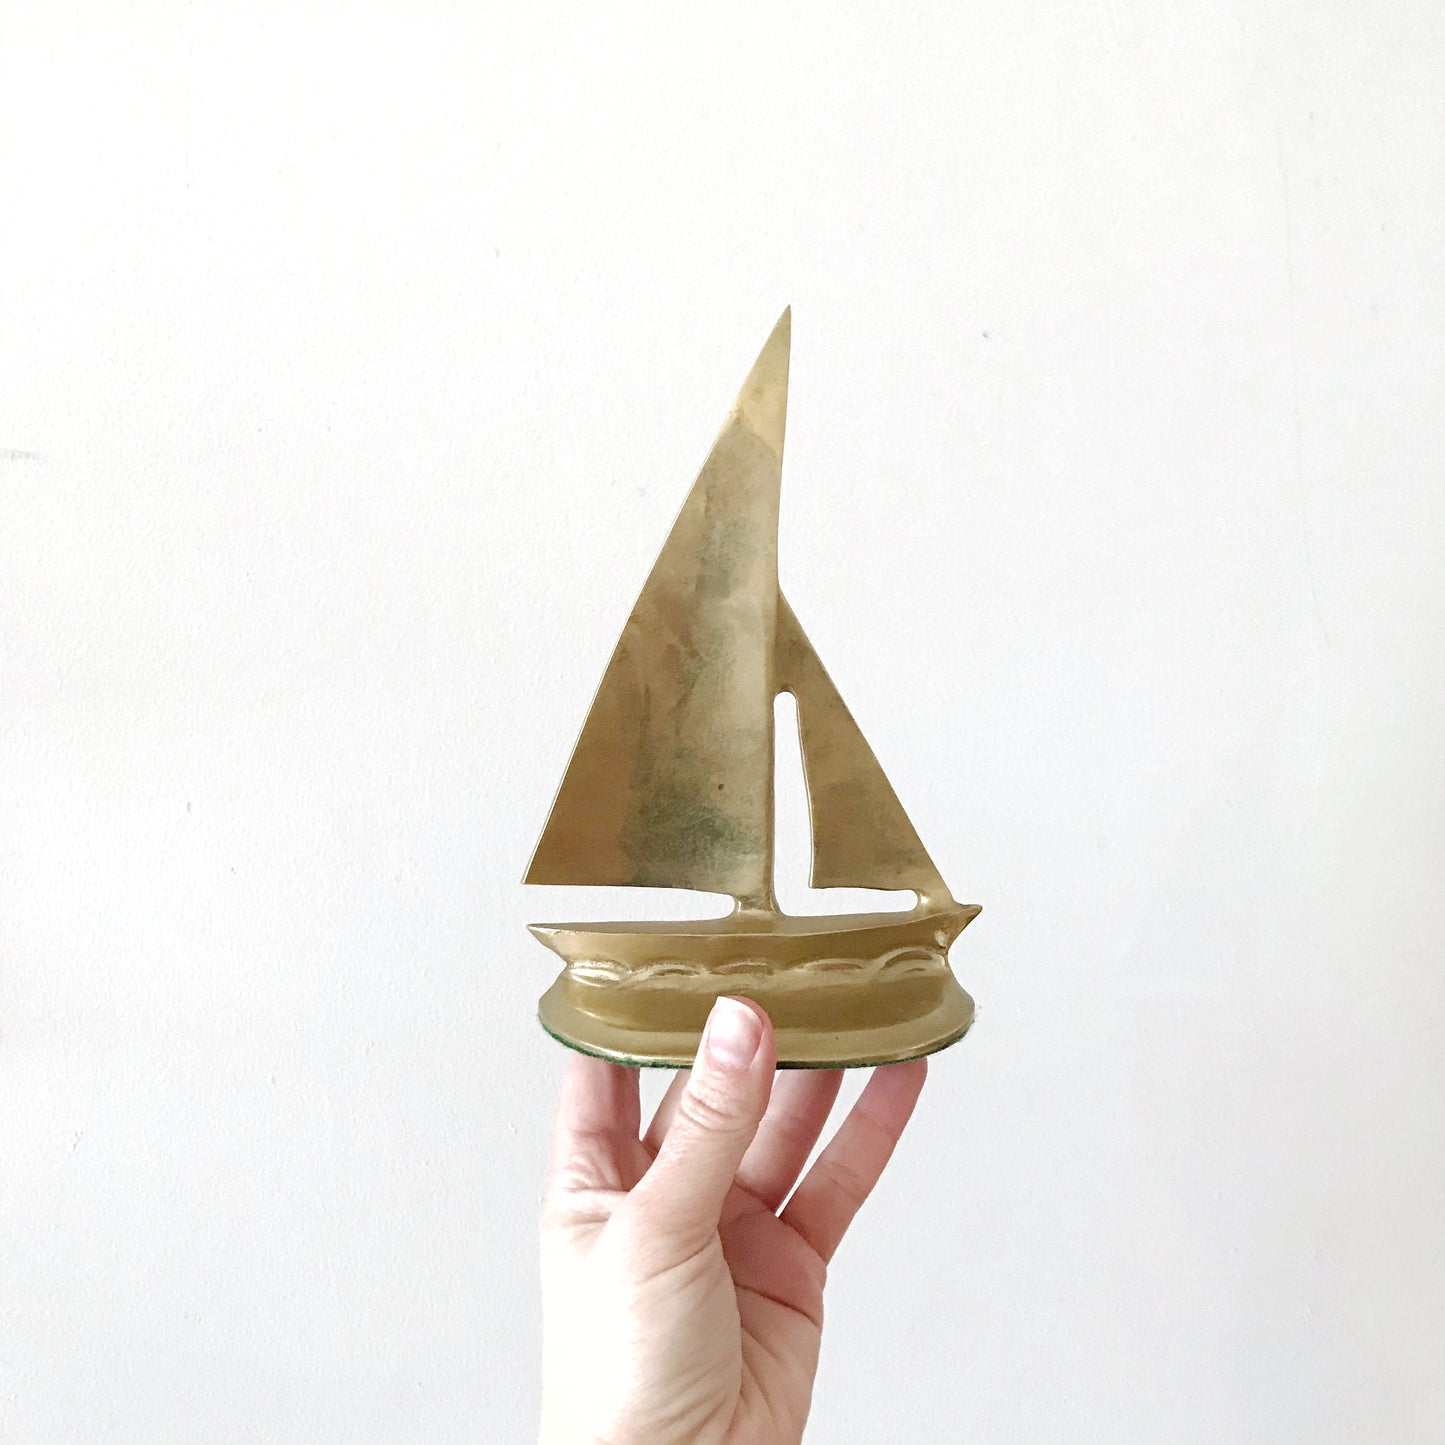 Pair of Vintage Brass Sailboat Bookends